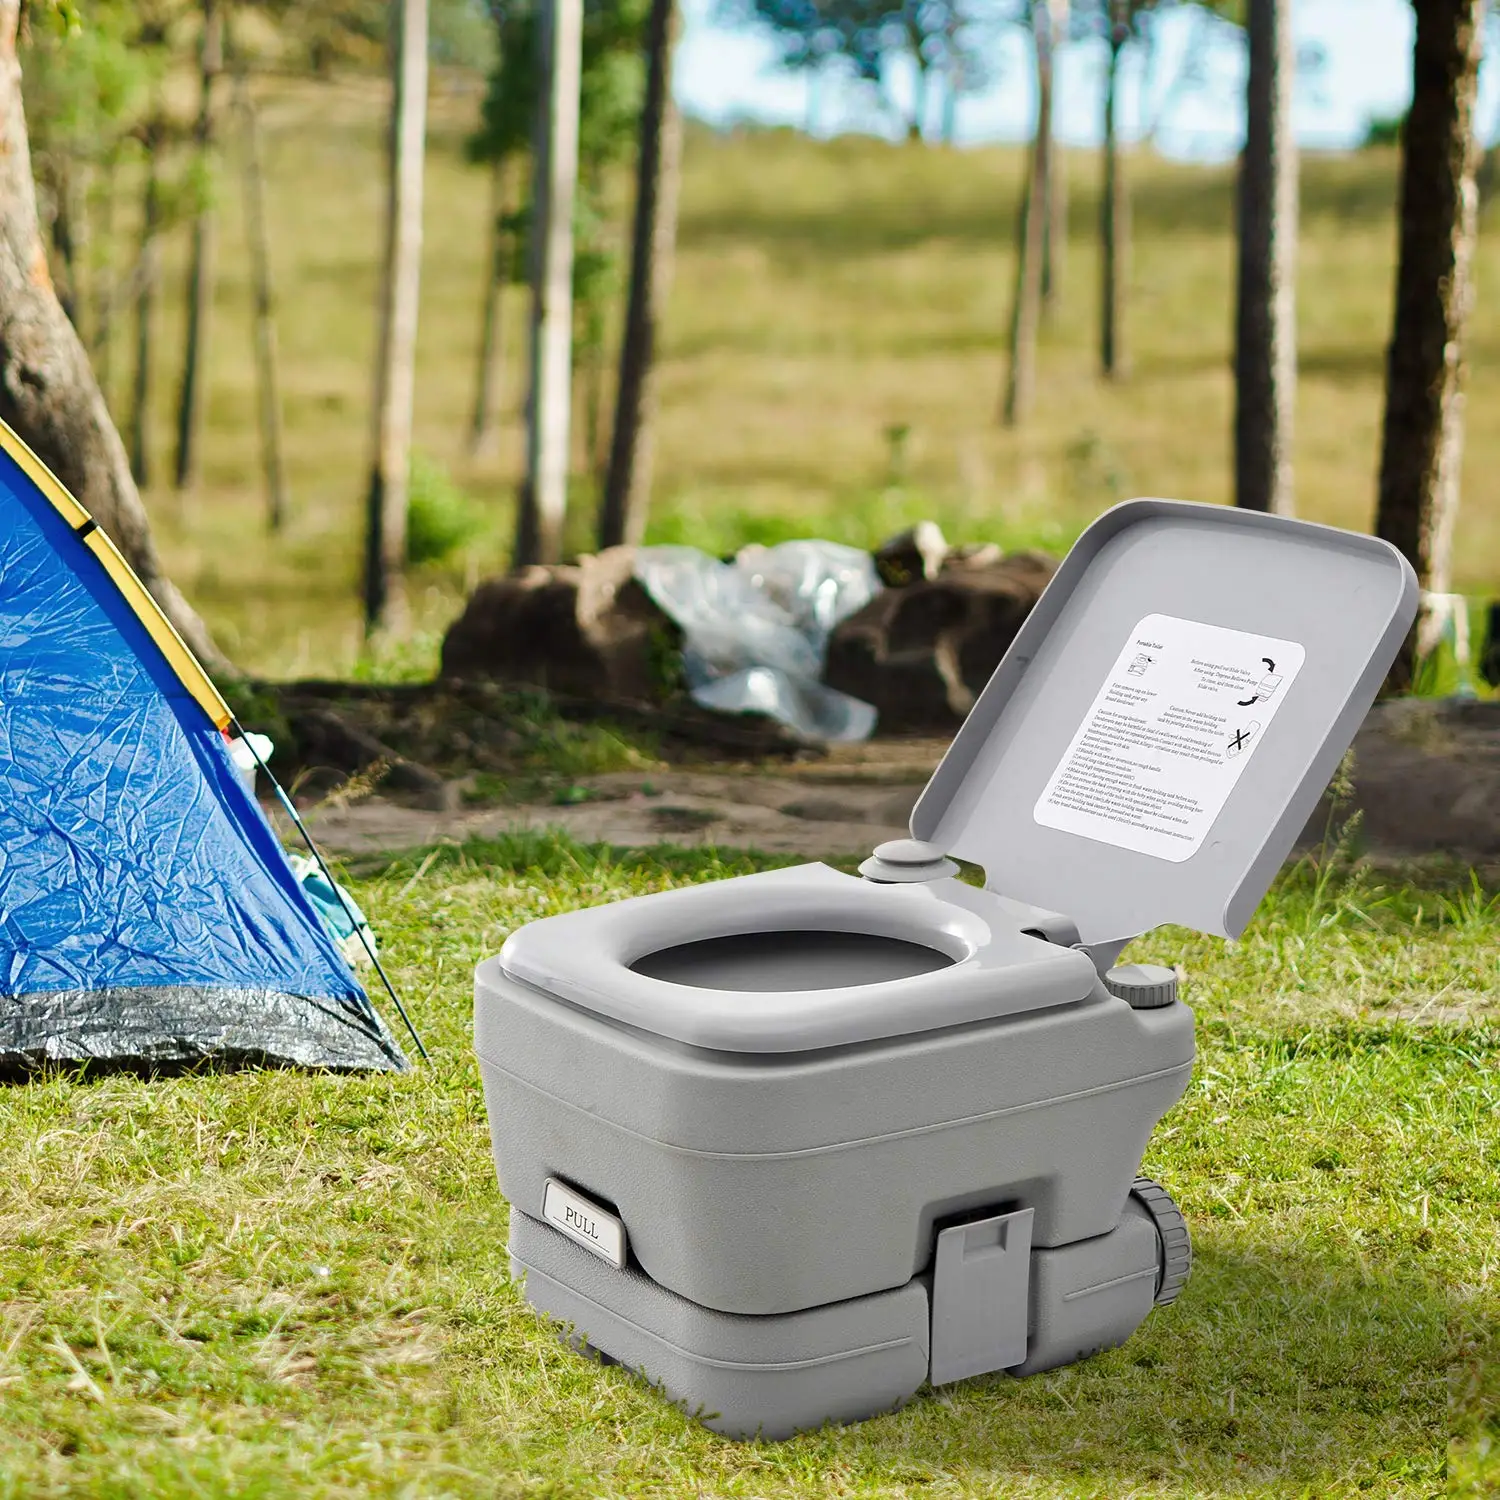 10L20L RV Toilet Commode Travel Potty Portable Toilet Compact Toilet Built-In Pour Spout And Washing Sprayer For Outdoor Camping